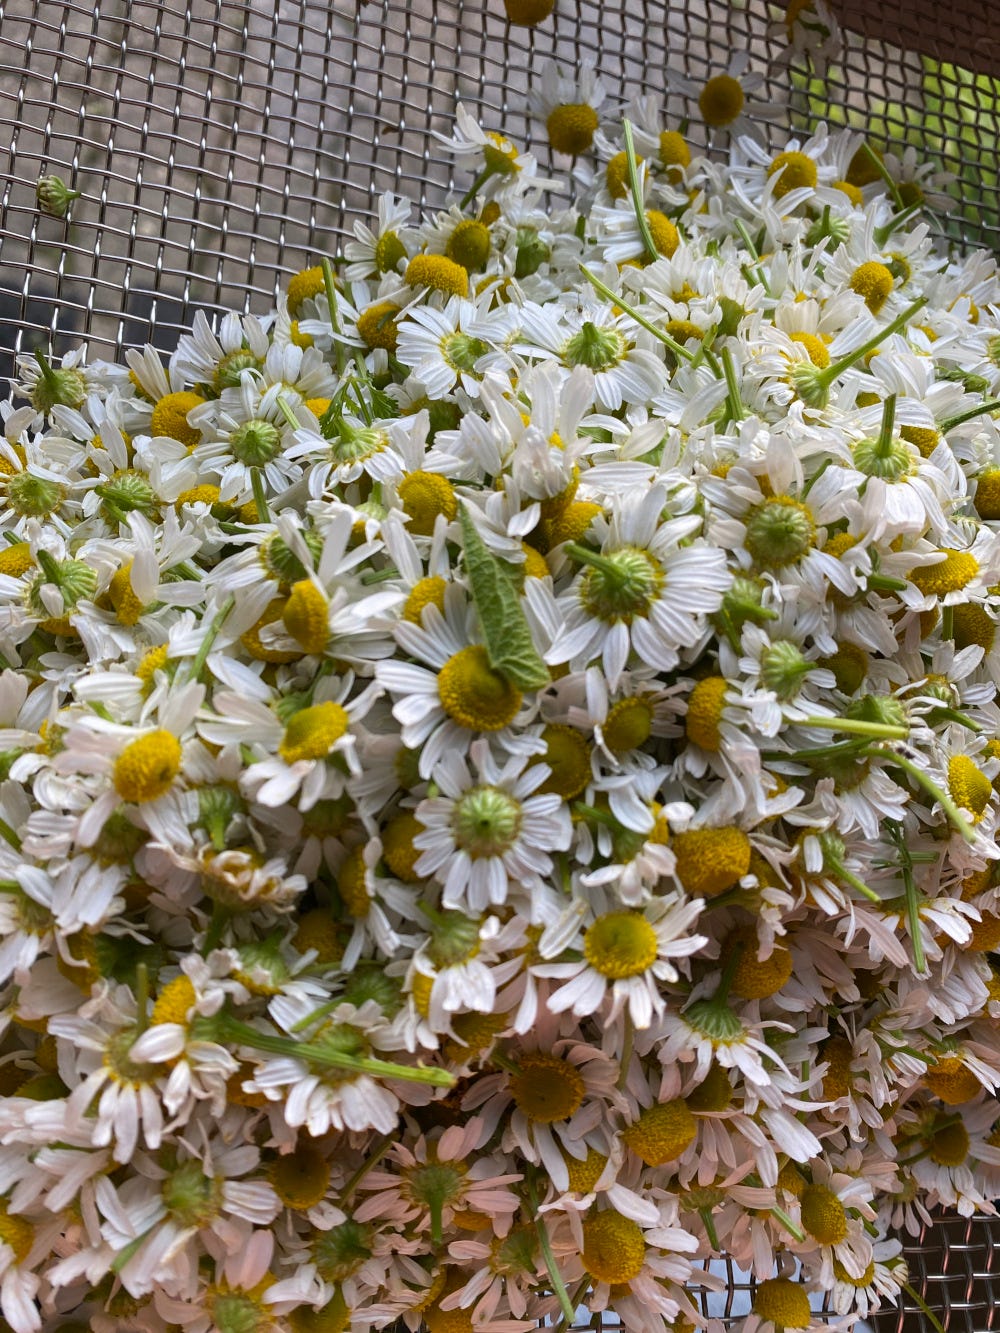 harvested chamomile flowers on a screen